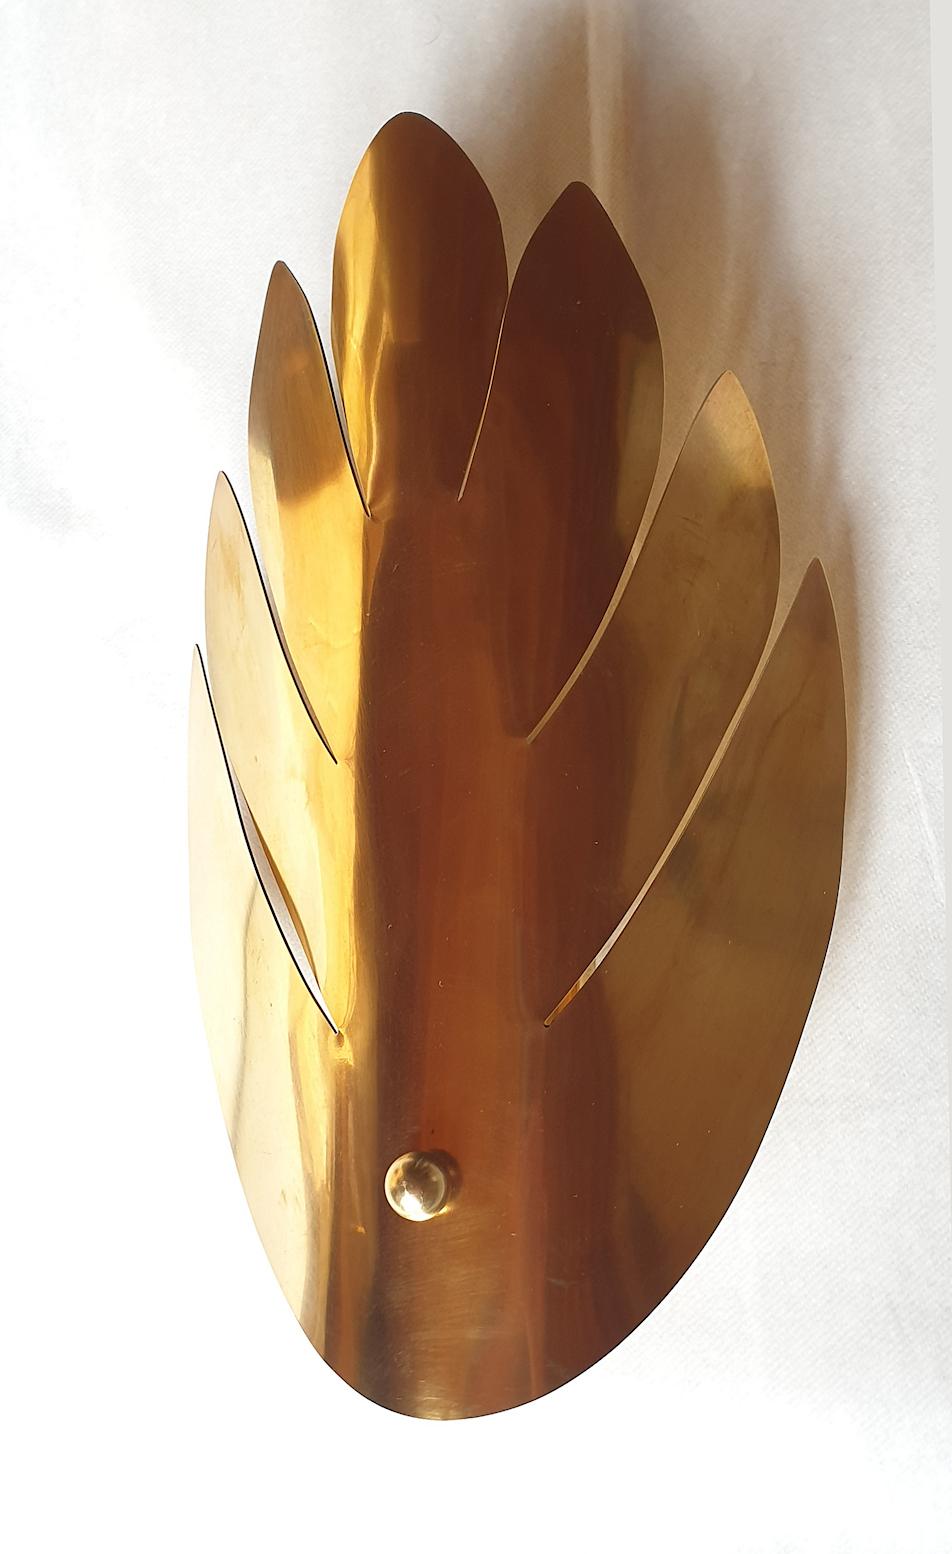 Pair of Mid-Century Modern brass wall sconces, in the style of Maison Jansen, France, 1970s
1-light each, rewired for the US.
Brass stylized curved leaf, and brass mounts.
In very good condition.

